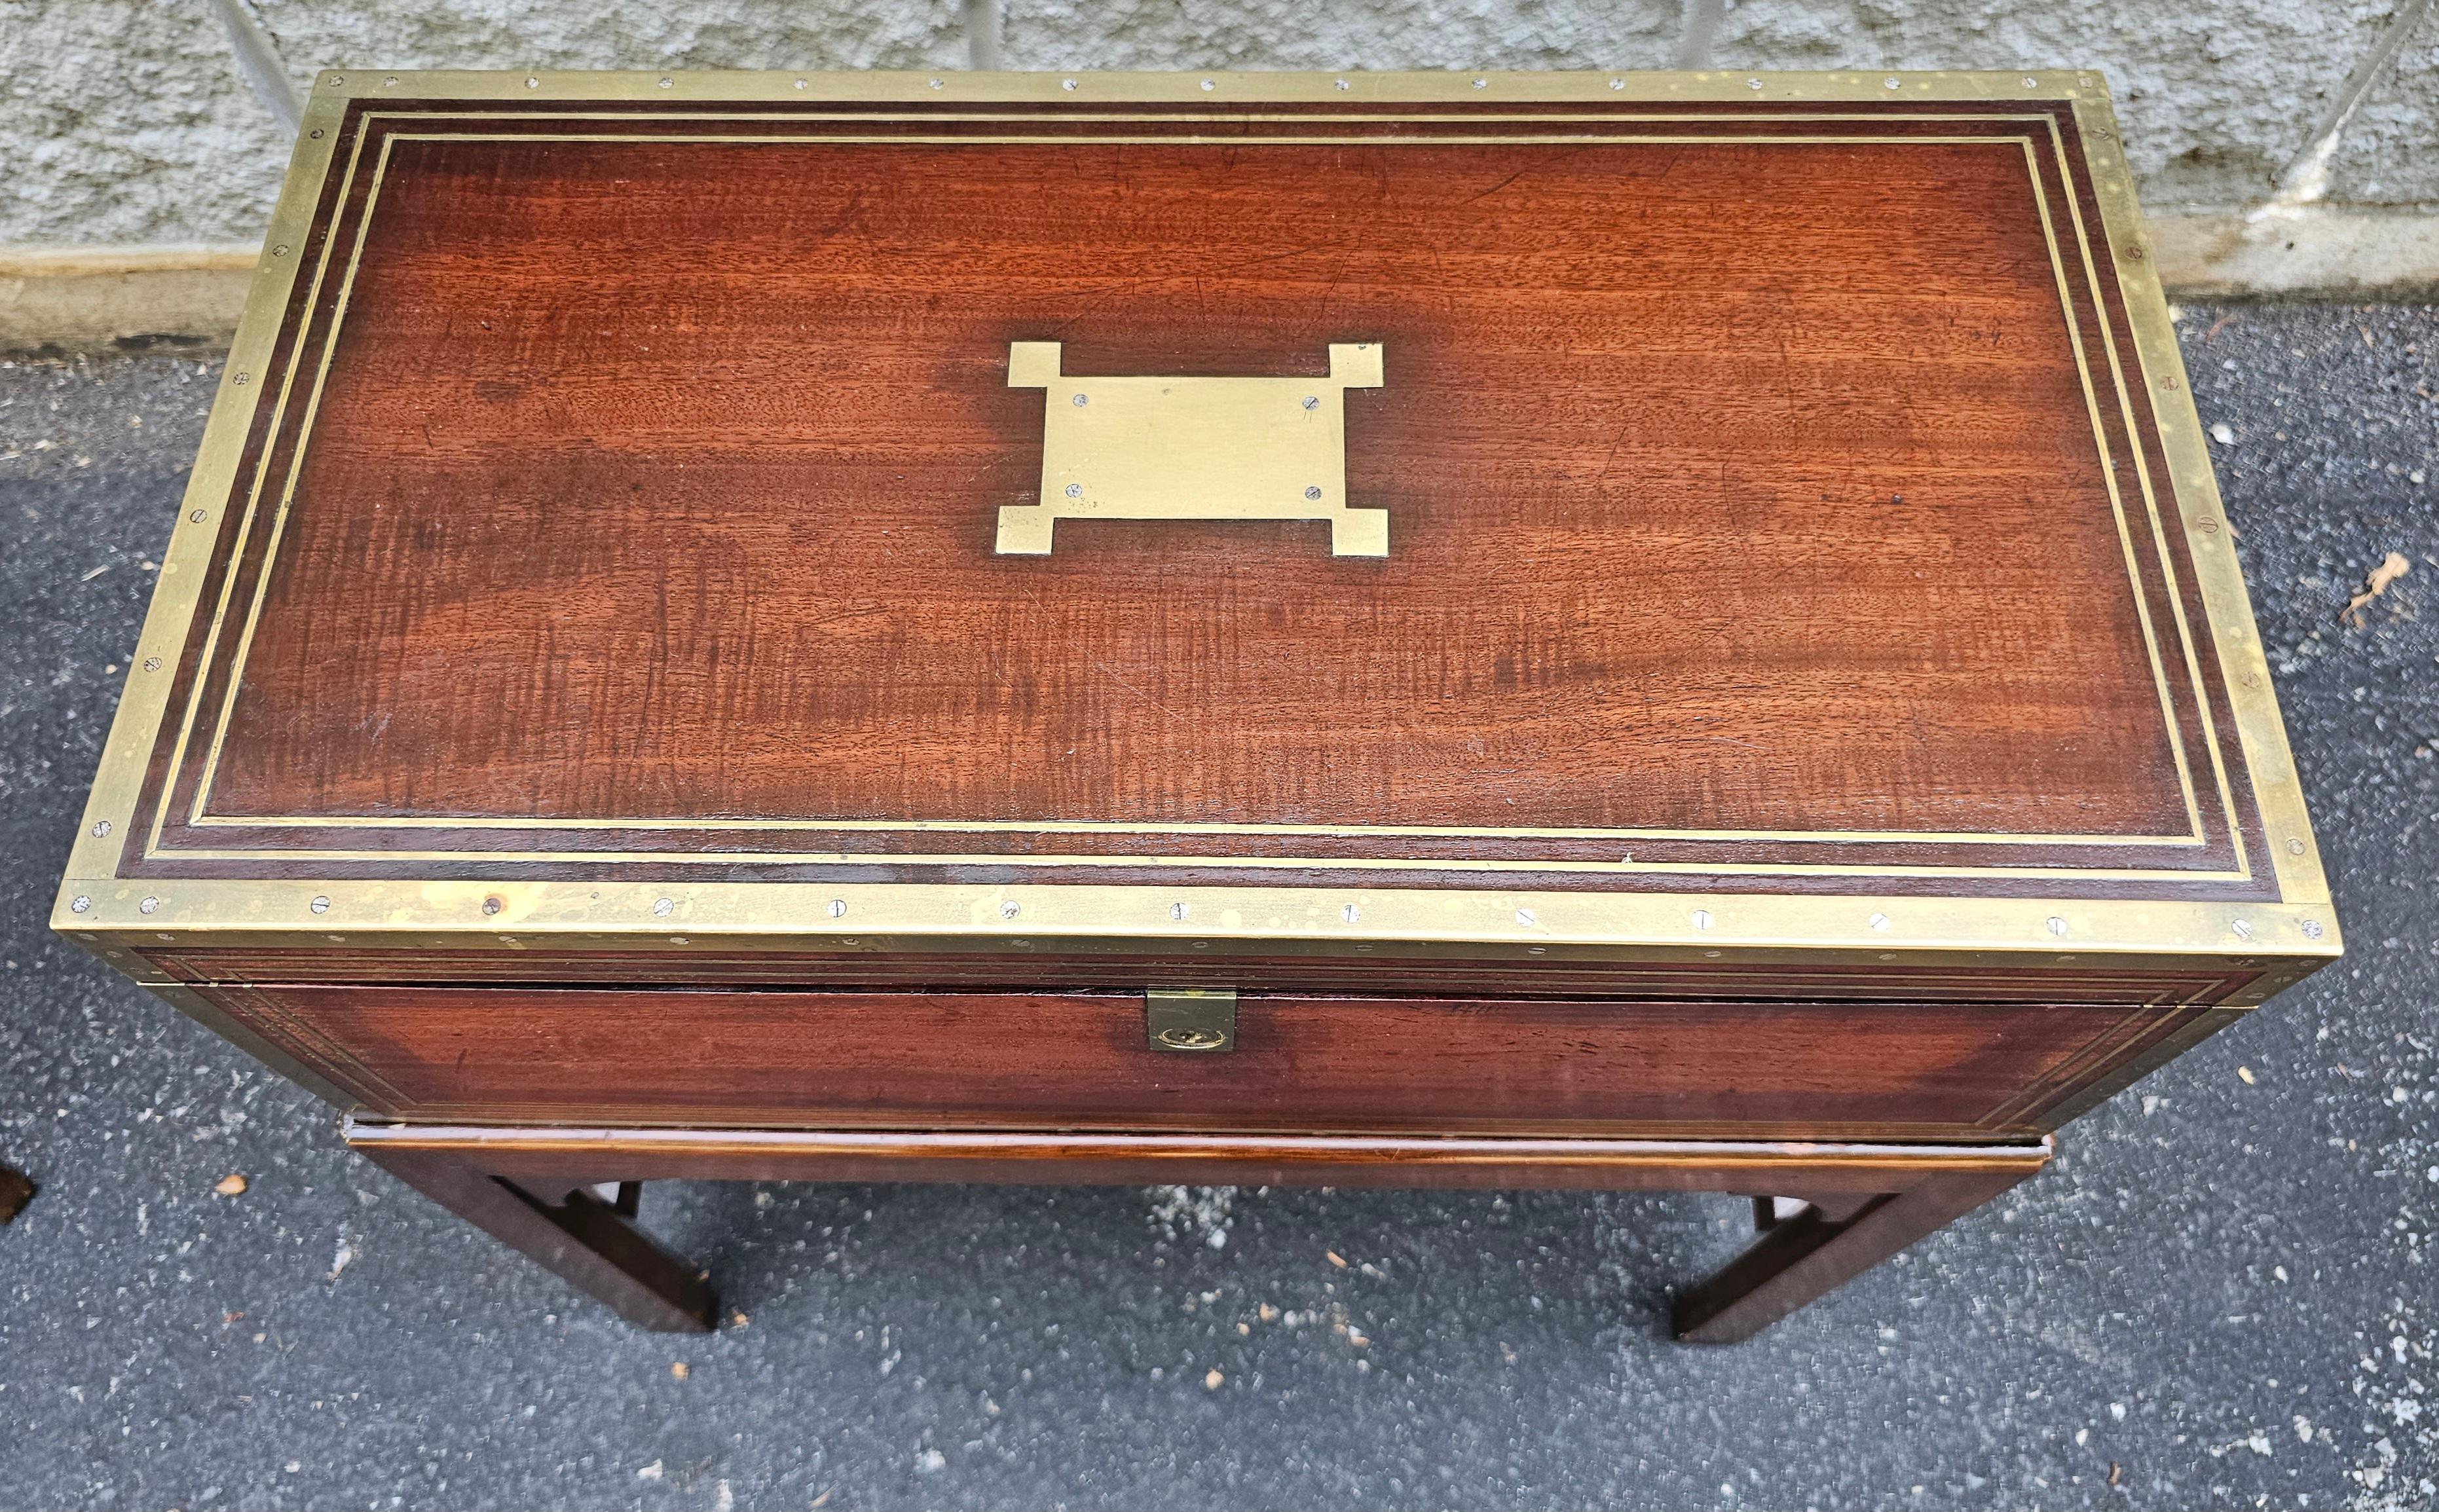 19th Century Mahogany and brass and brass inlays traveling lap desk on stand. Measures 22.5